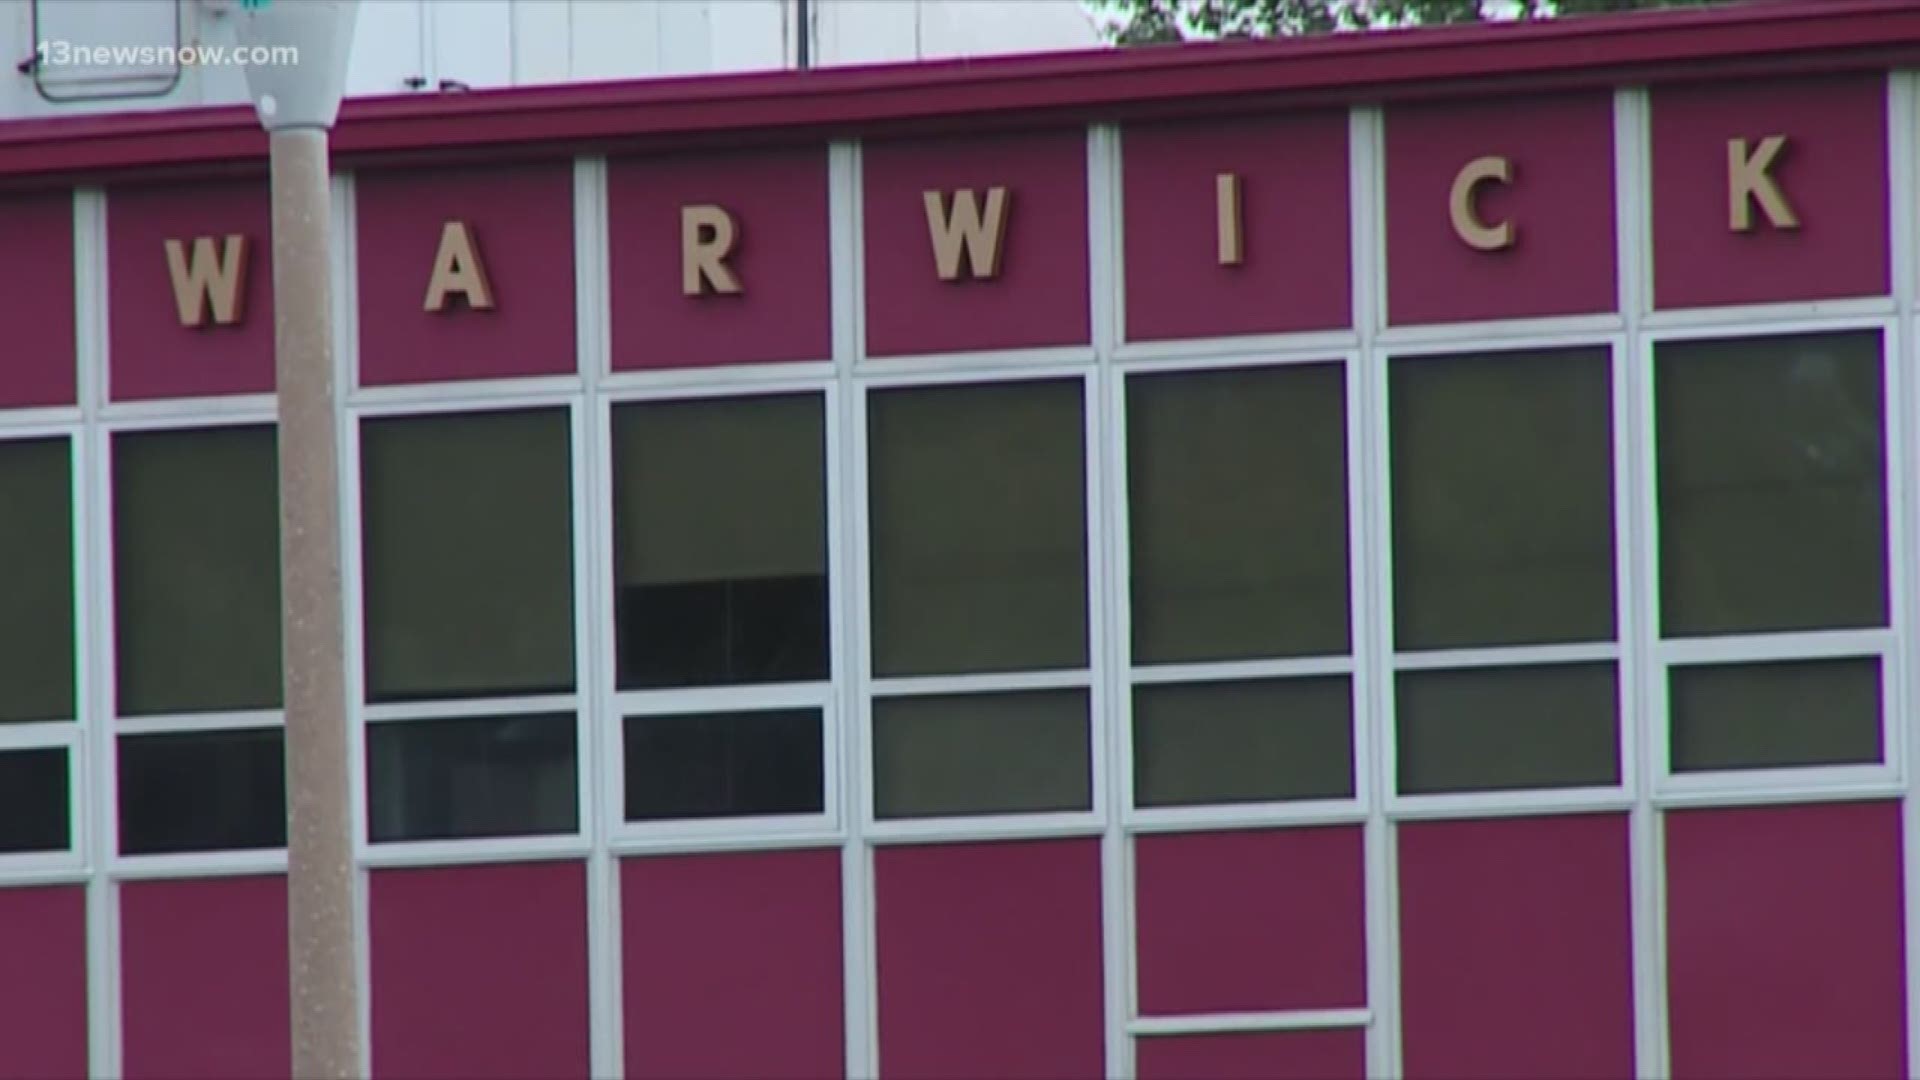 Police and school administrators were notified about a threat on social media against Warwick High School. Police are investigating the post.